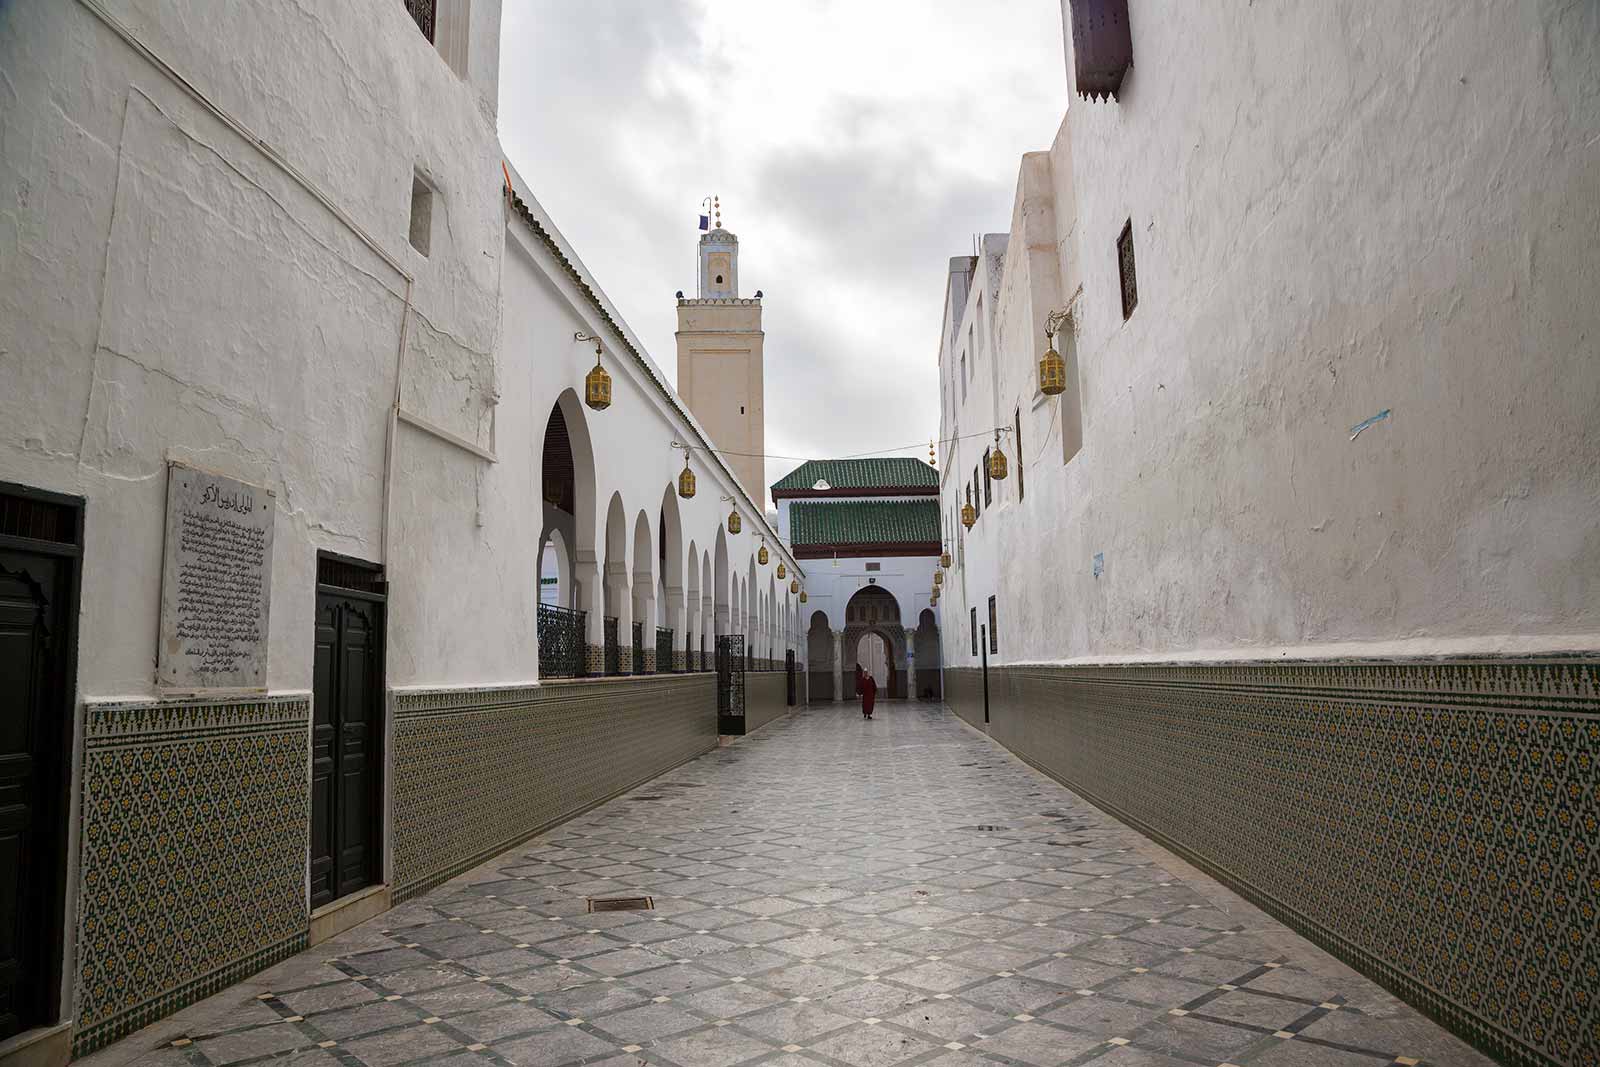 The Mosque and Mausoleum in Moulay Idriss.